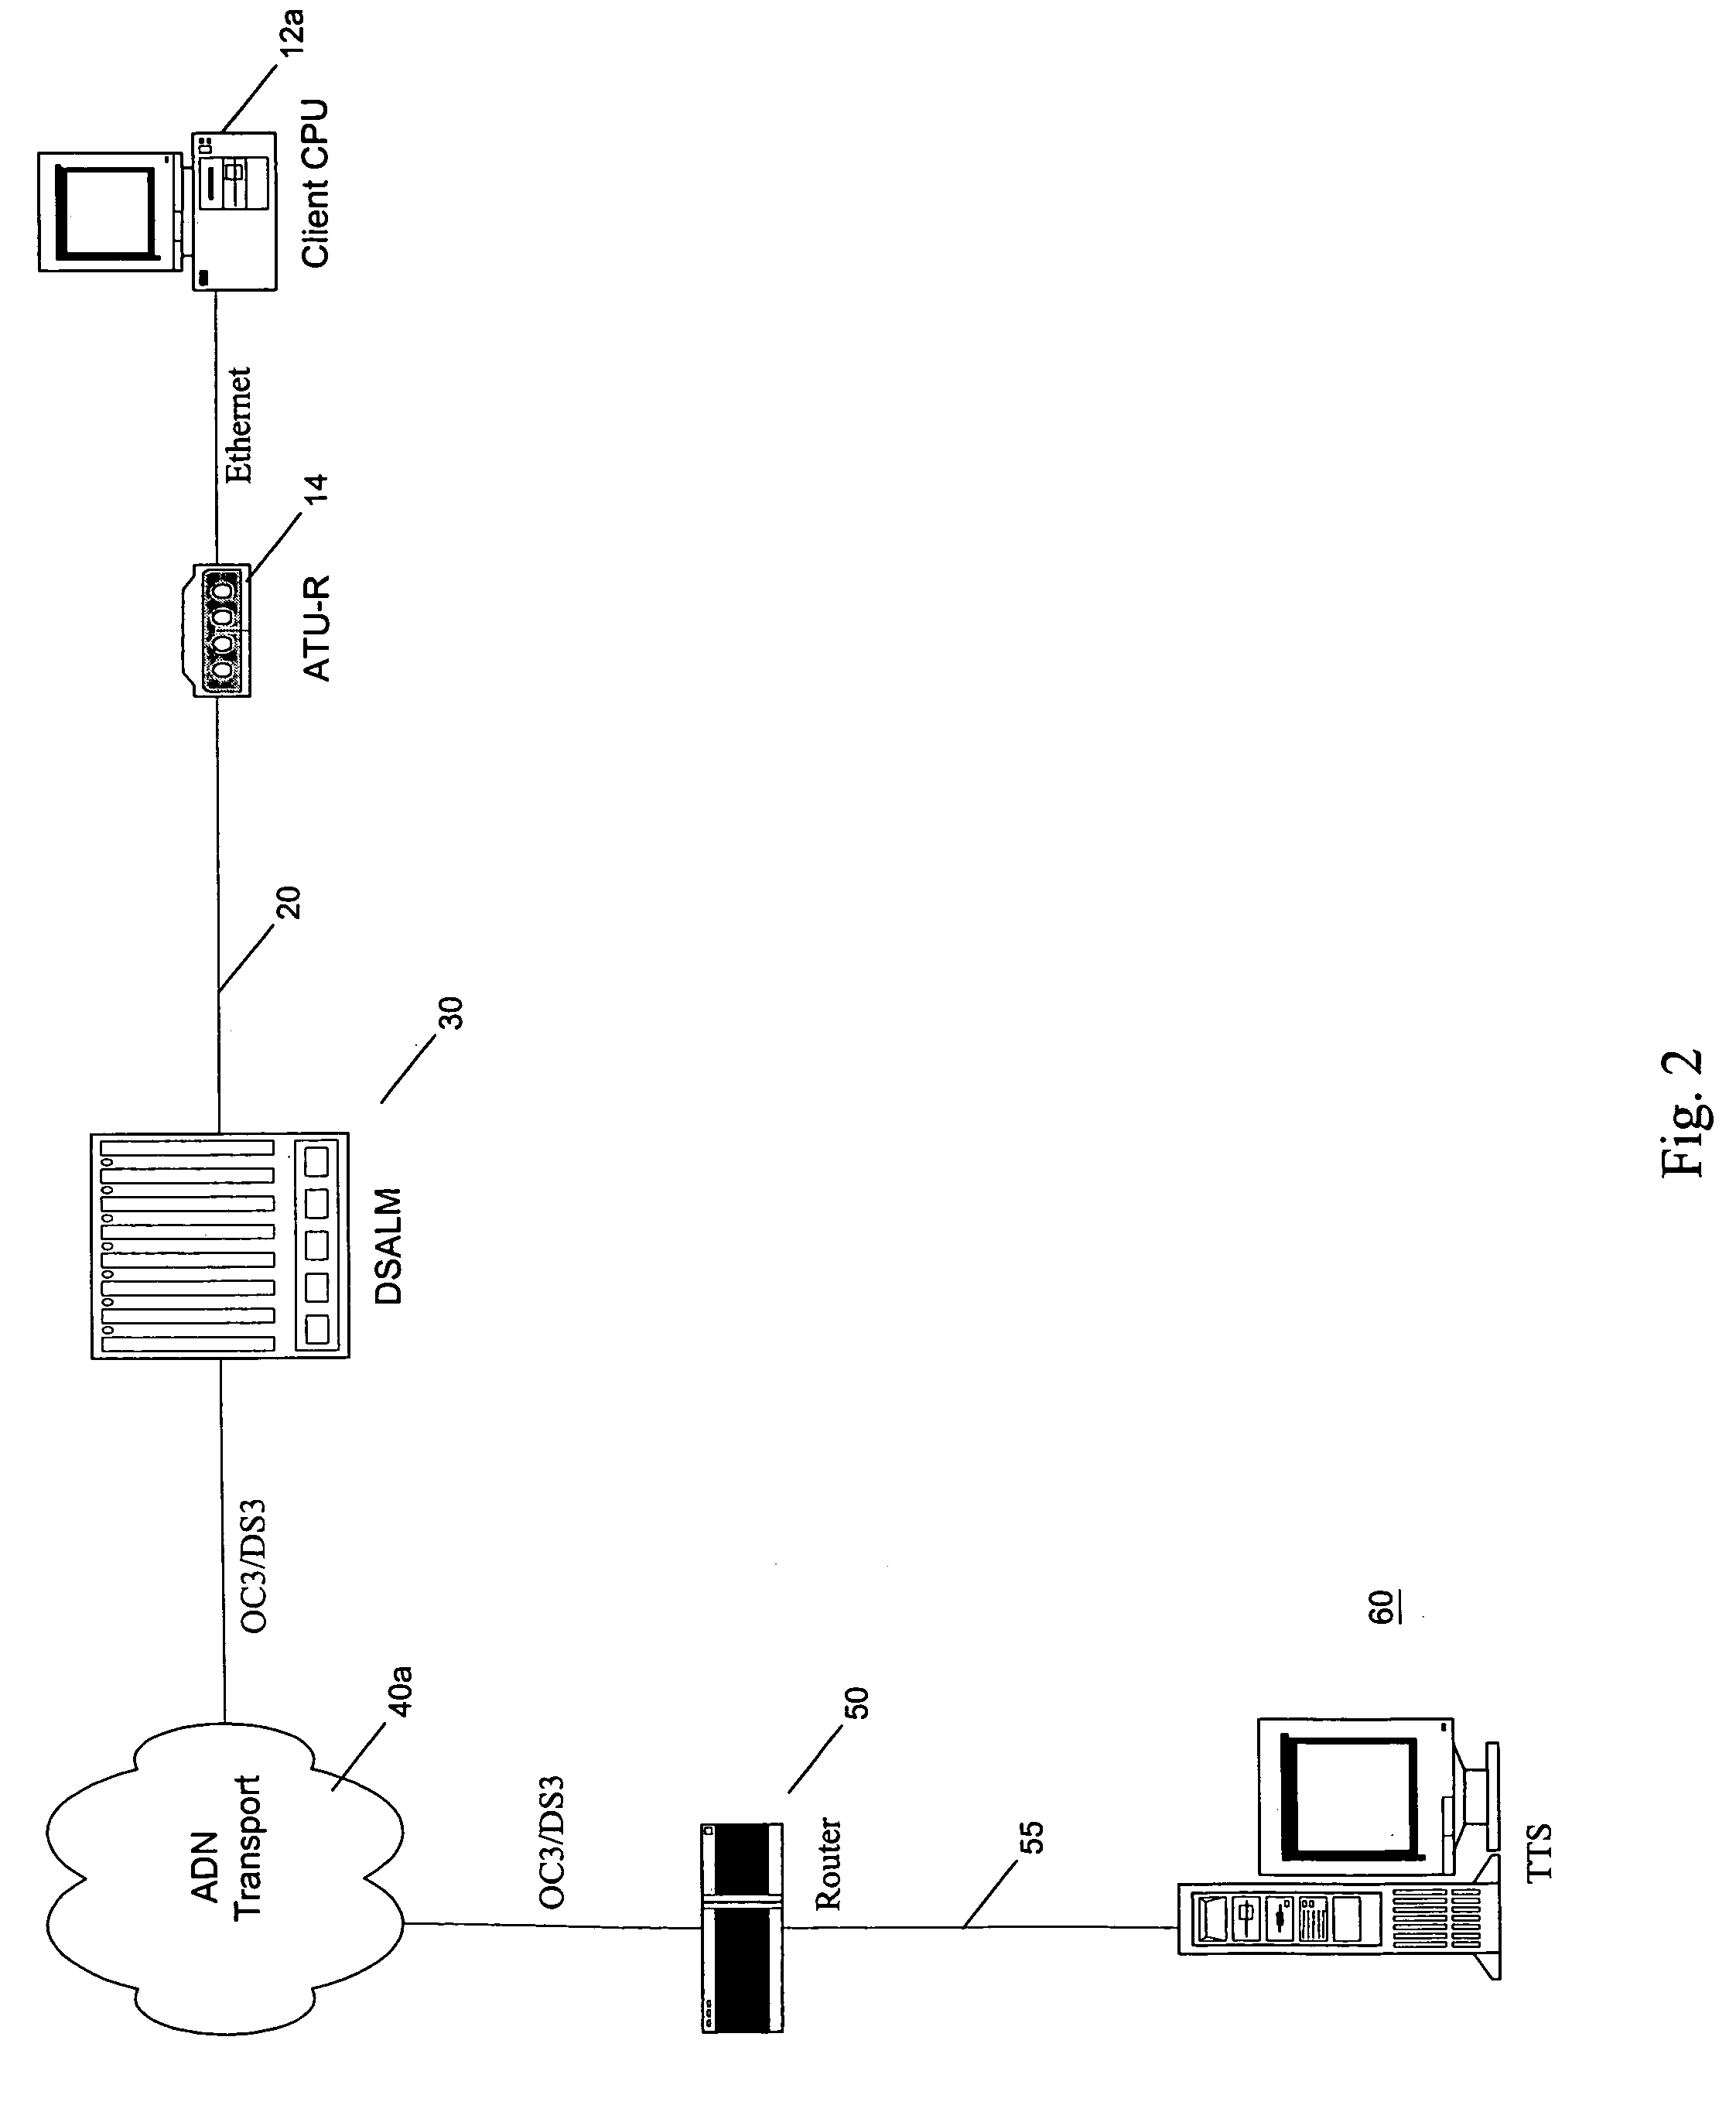 Apparatus for and method of providing and measuring data throughput to and from a packet data network